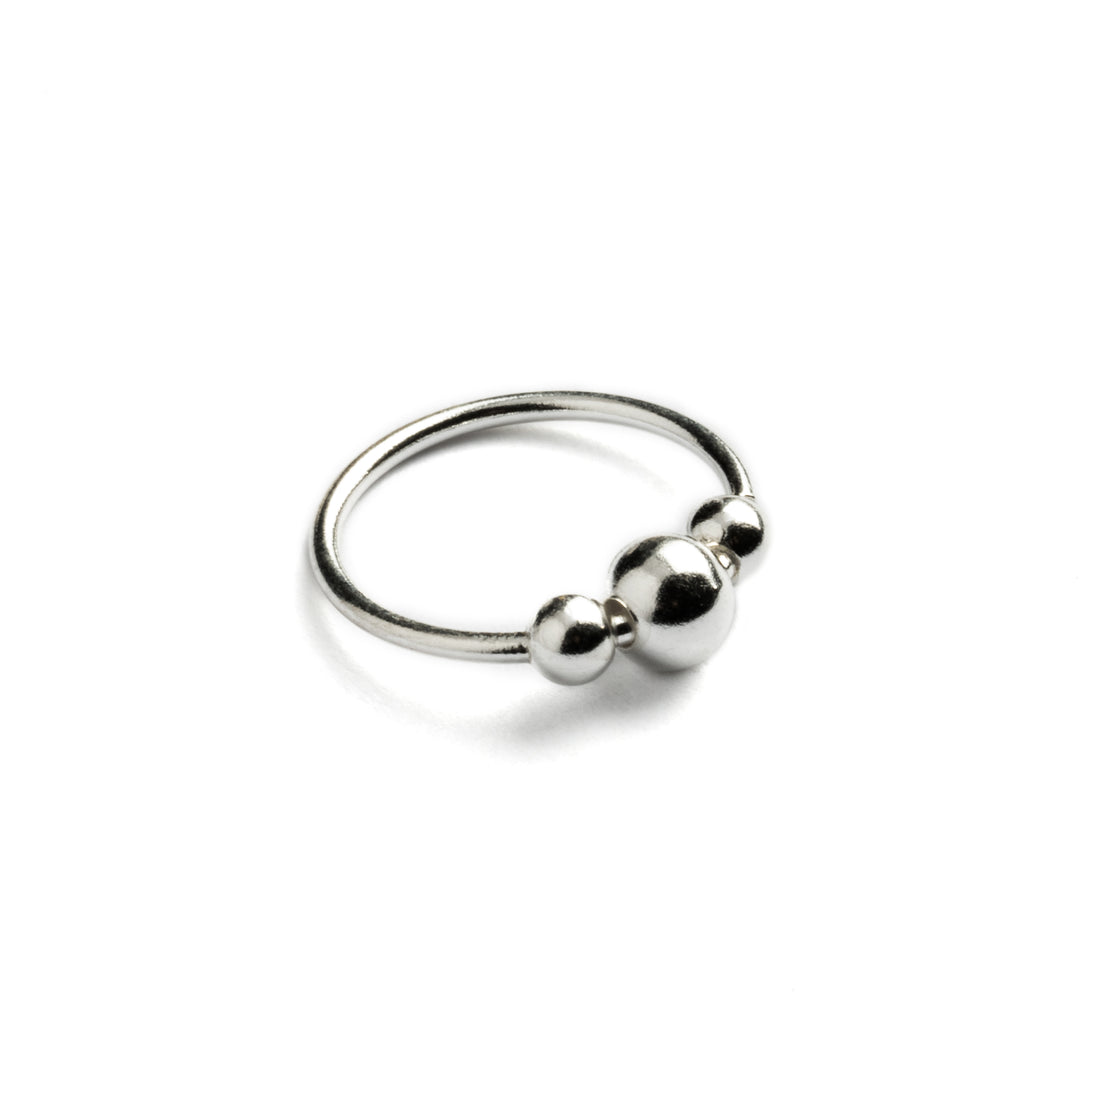 Silver beads nose ring right side view